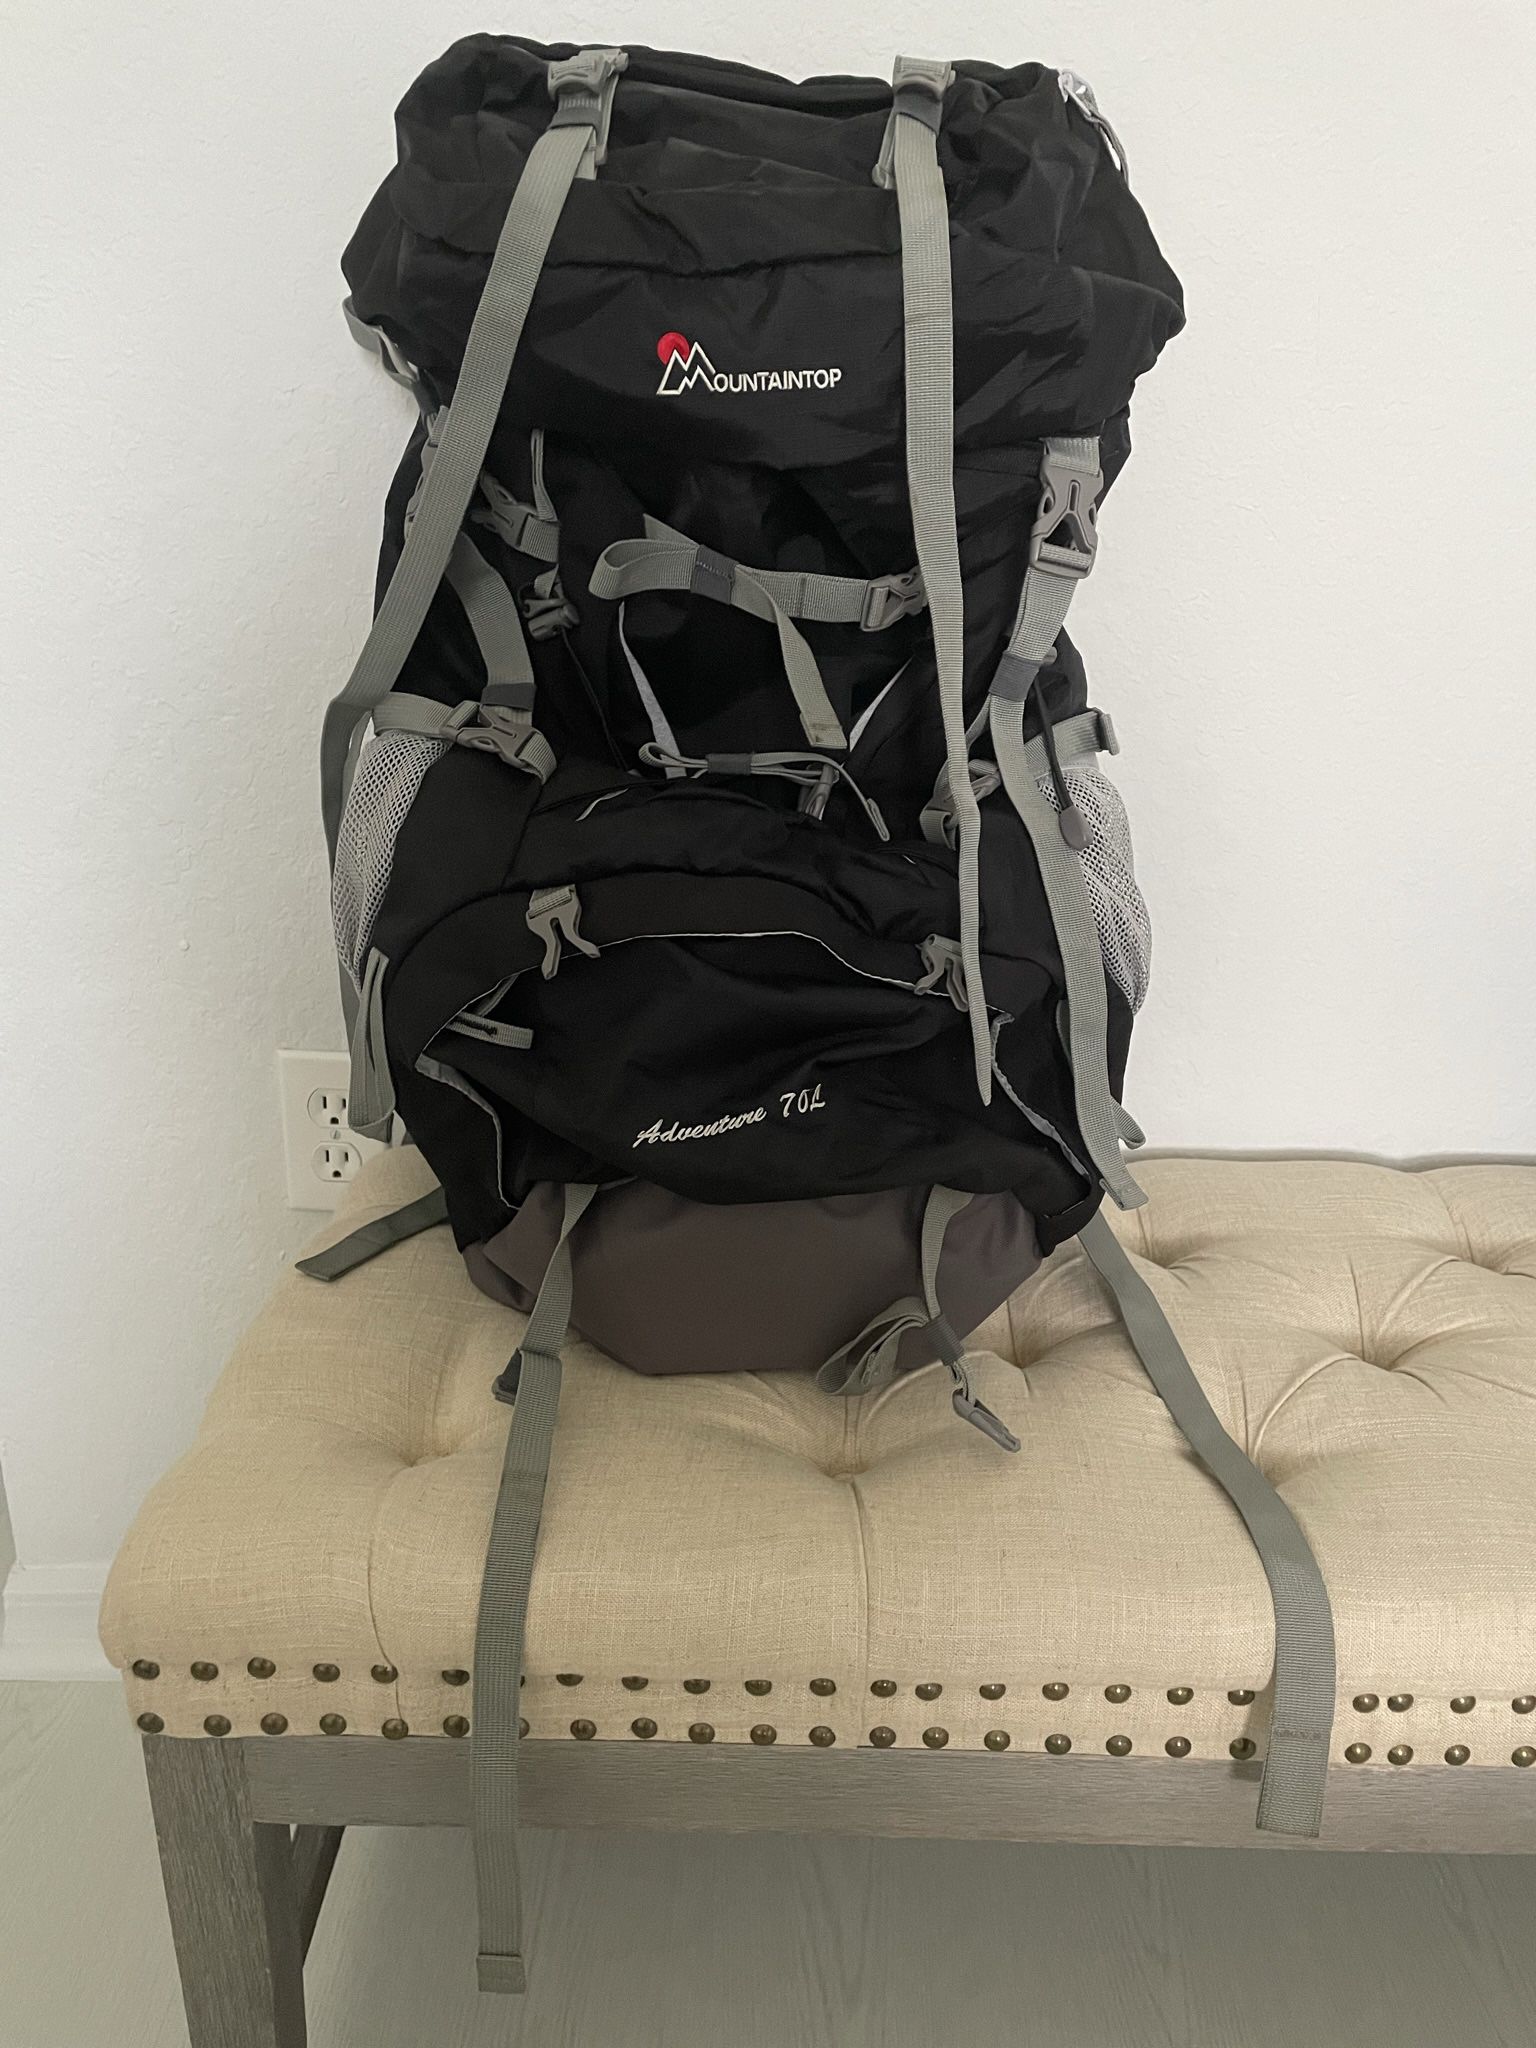 Mountaintop 70L Hiking Backpack